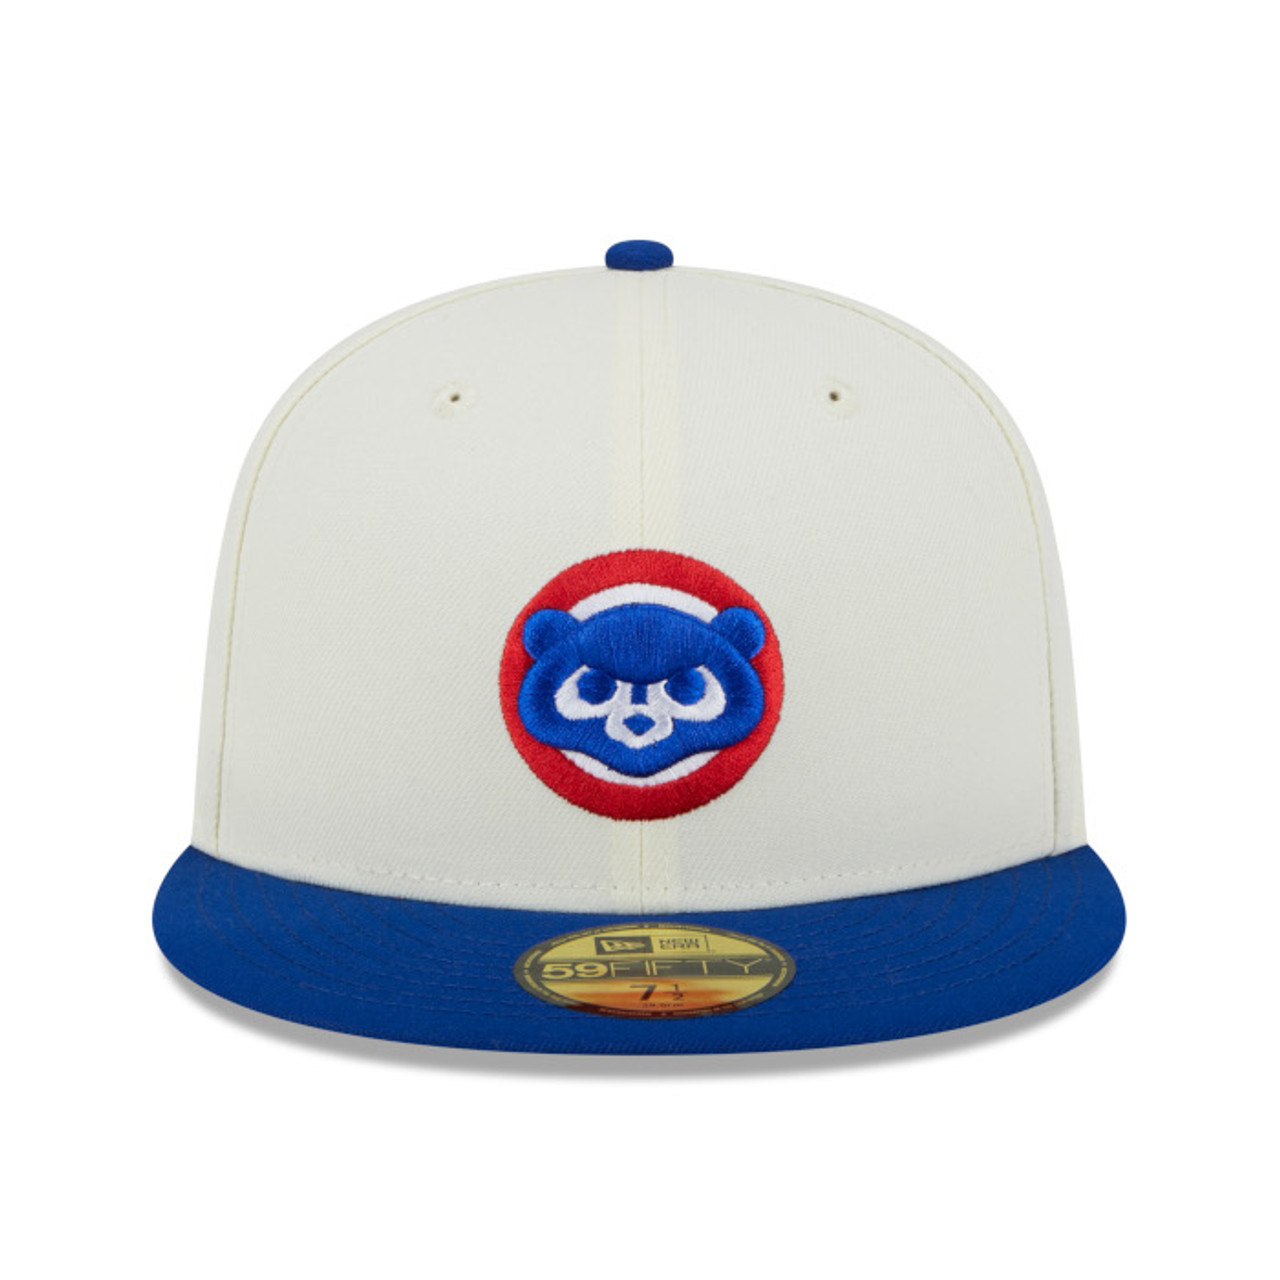 NEW ERA CHICAGO CUBS 59FIFTY FITTED HAT | www.myglobaltax.com